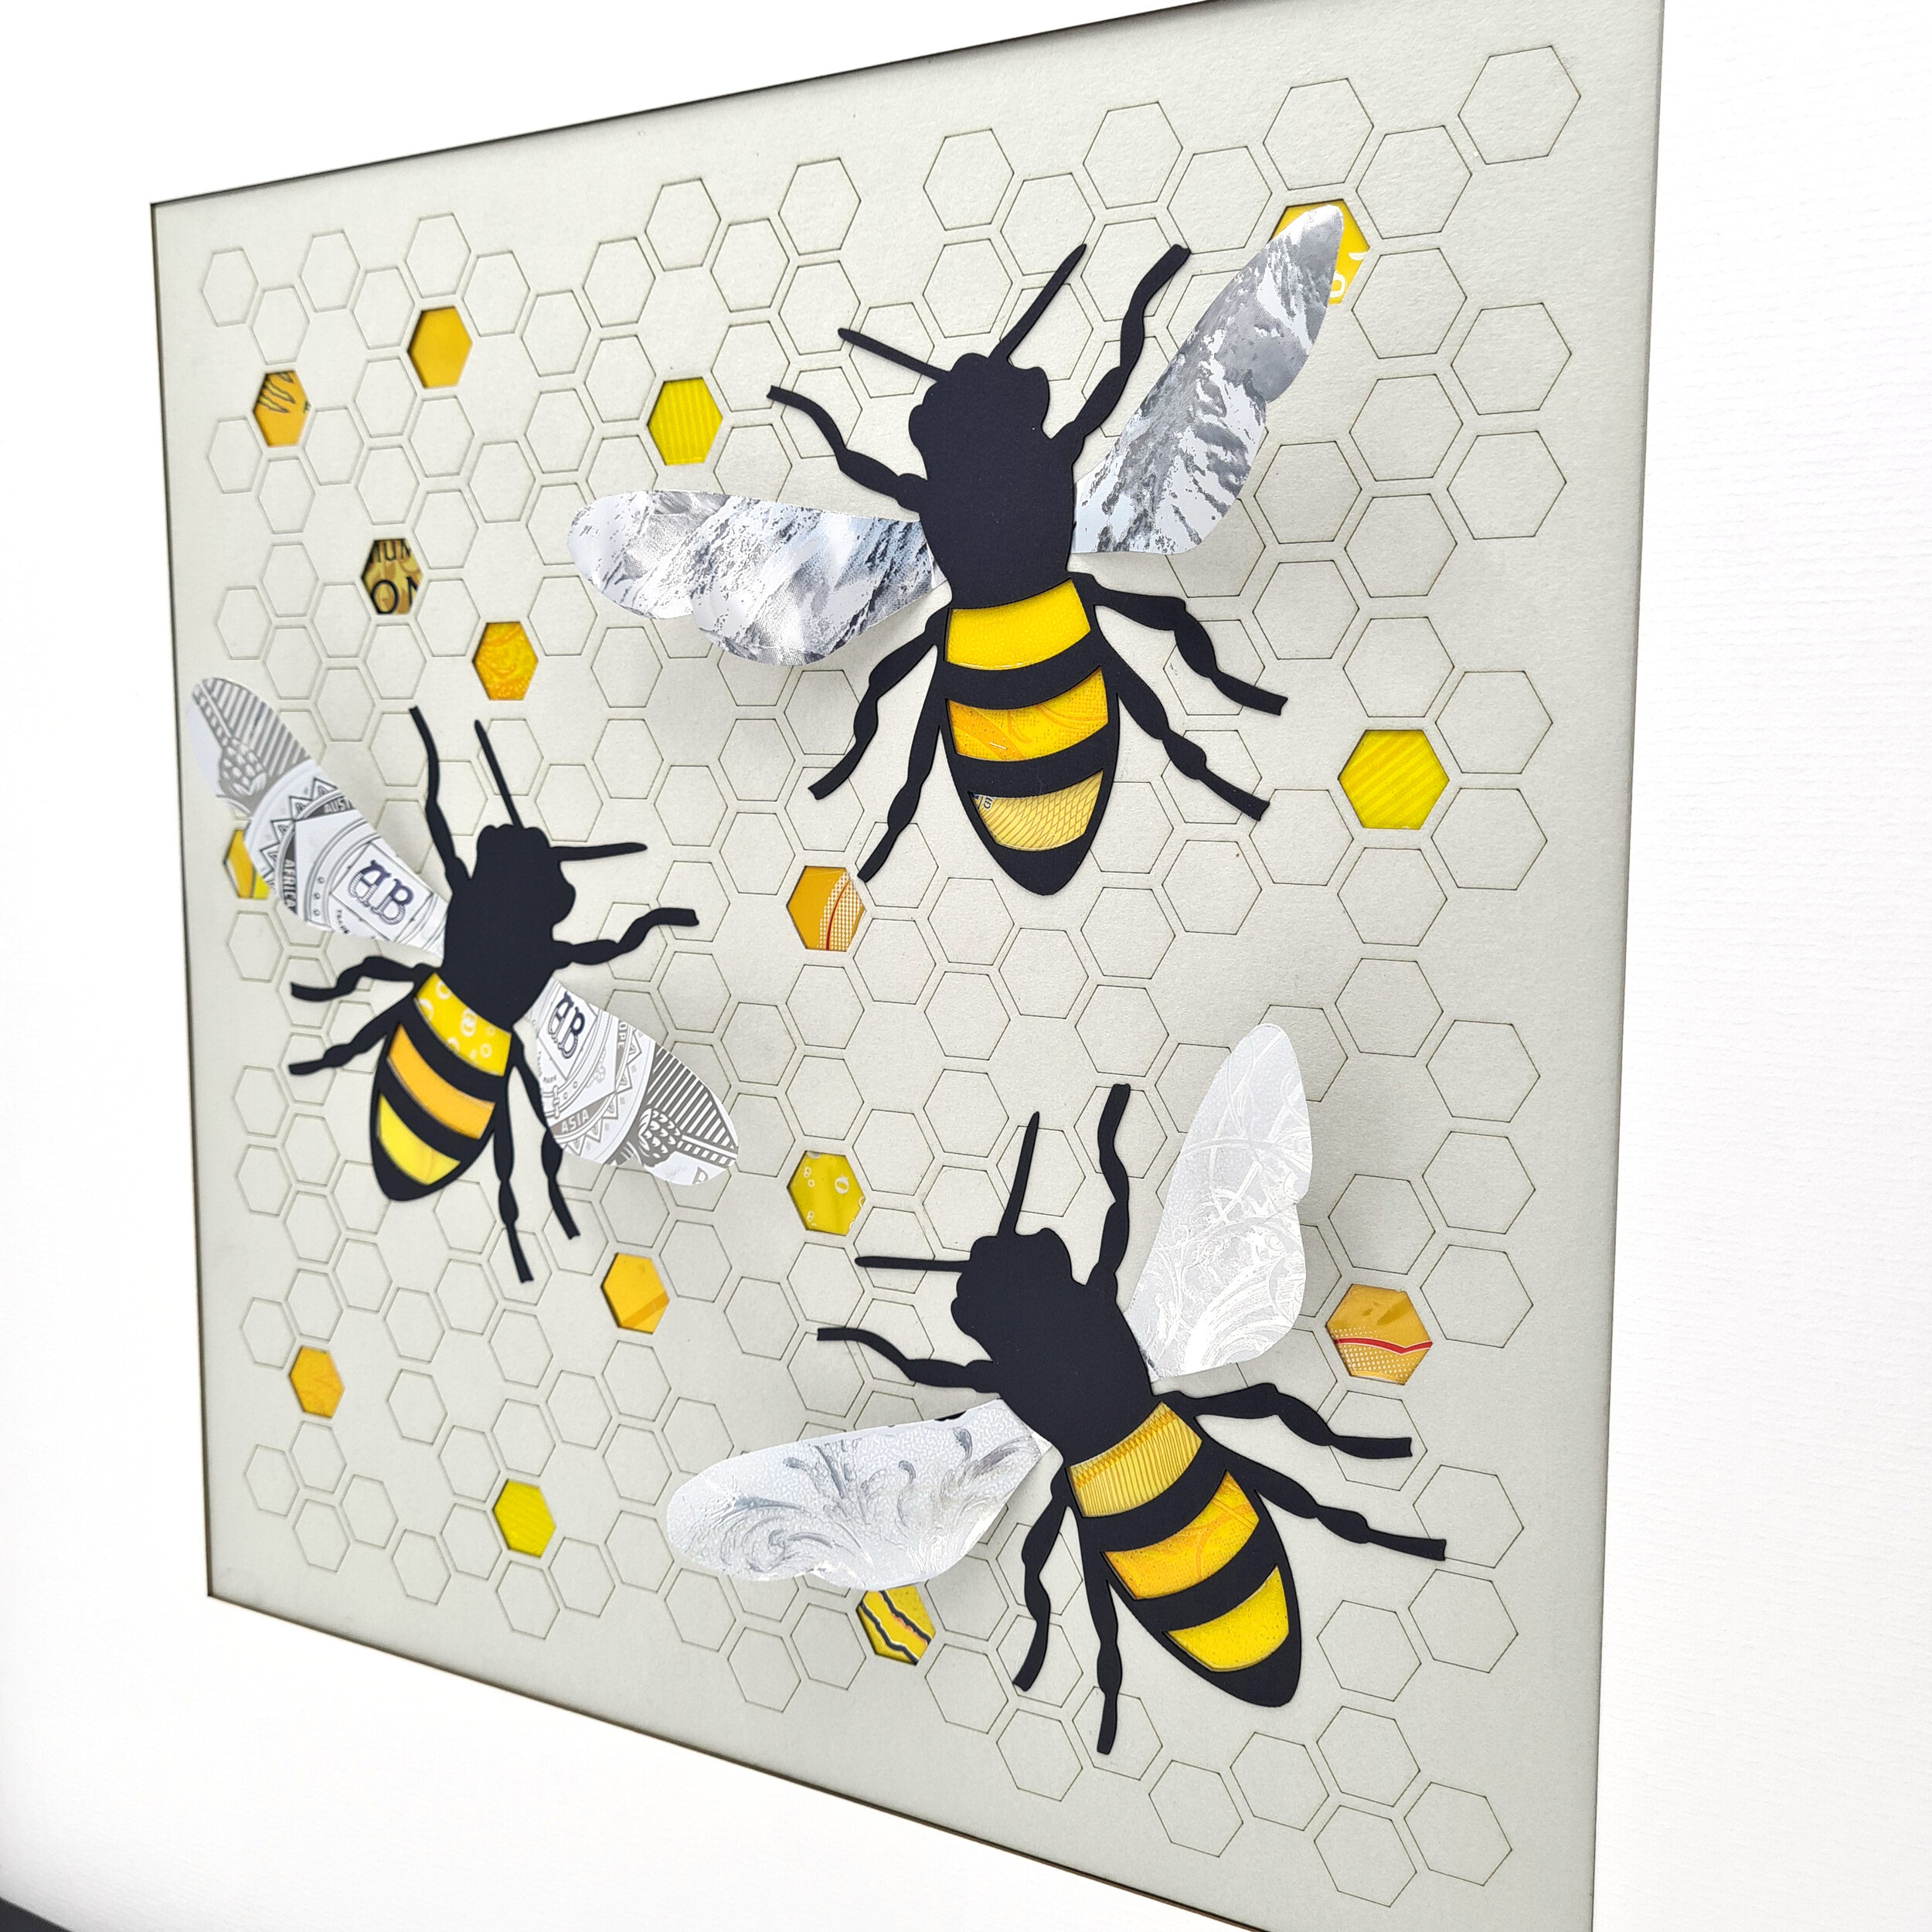 Manchester Bees handmade from drinks cans